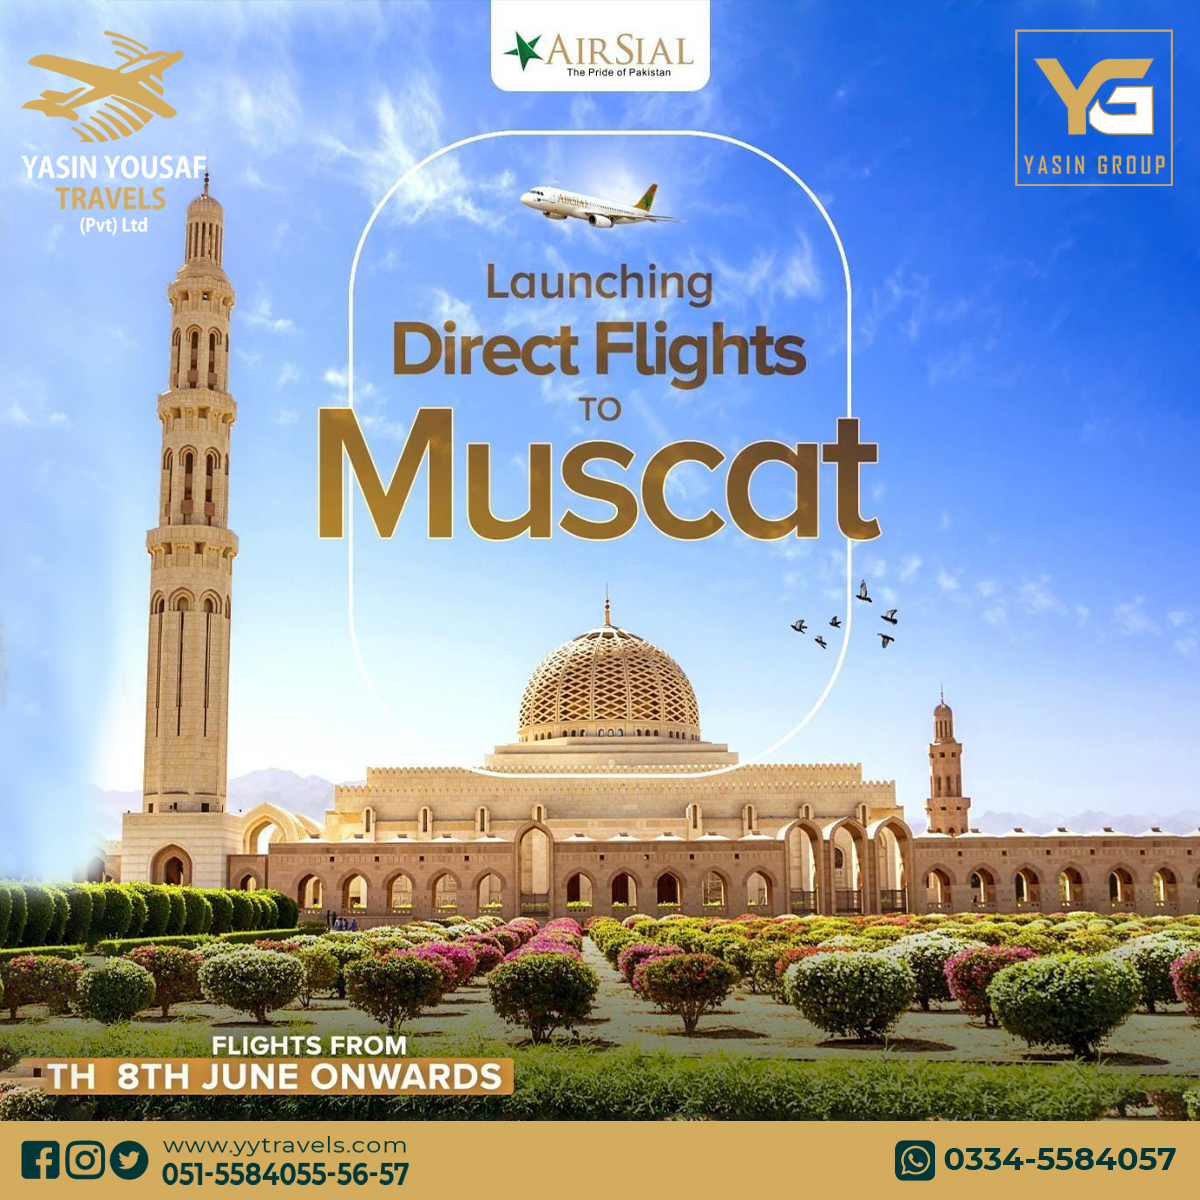 Launching Direct Flights to MUSCAT.
#airsial